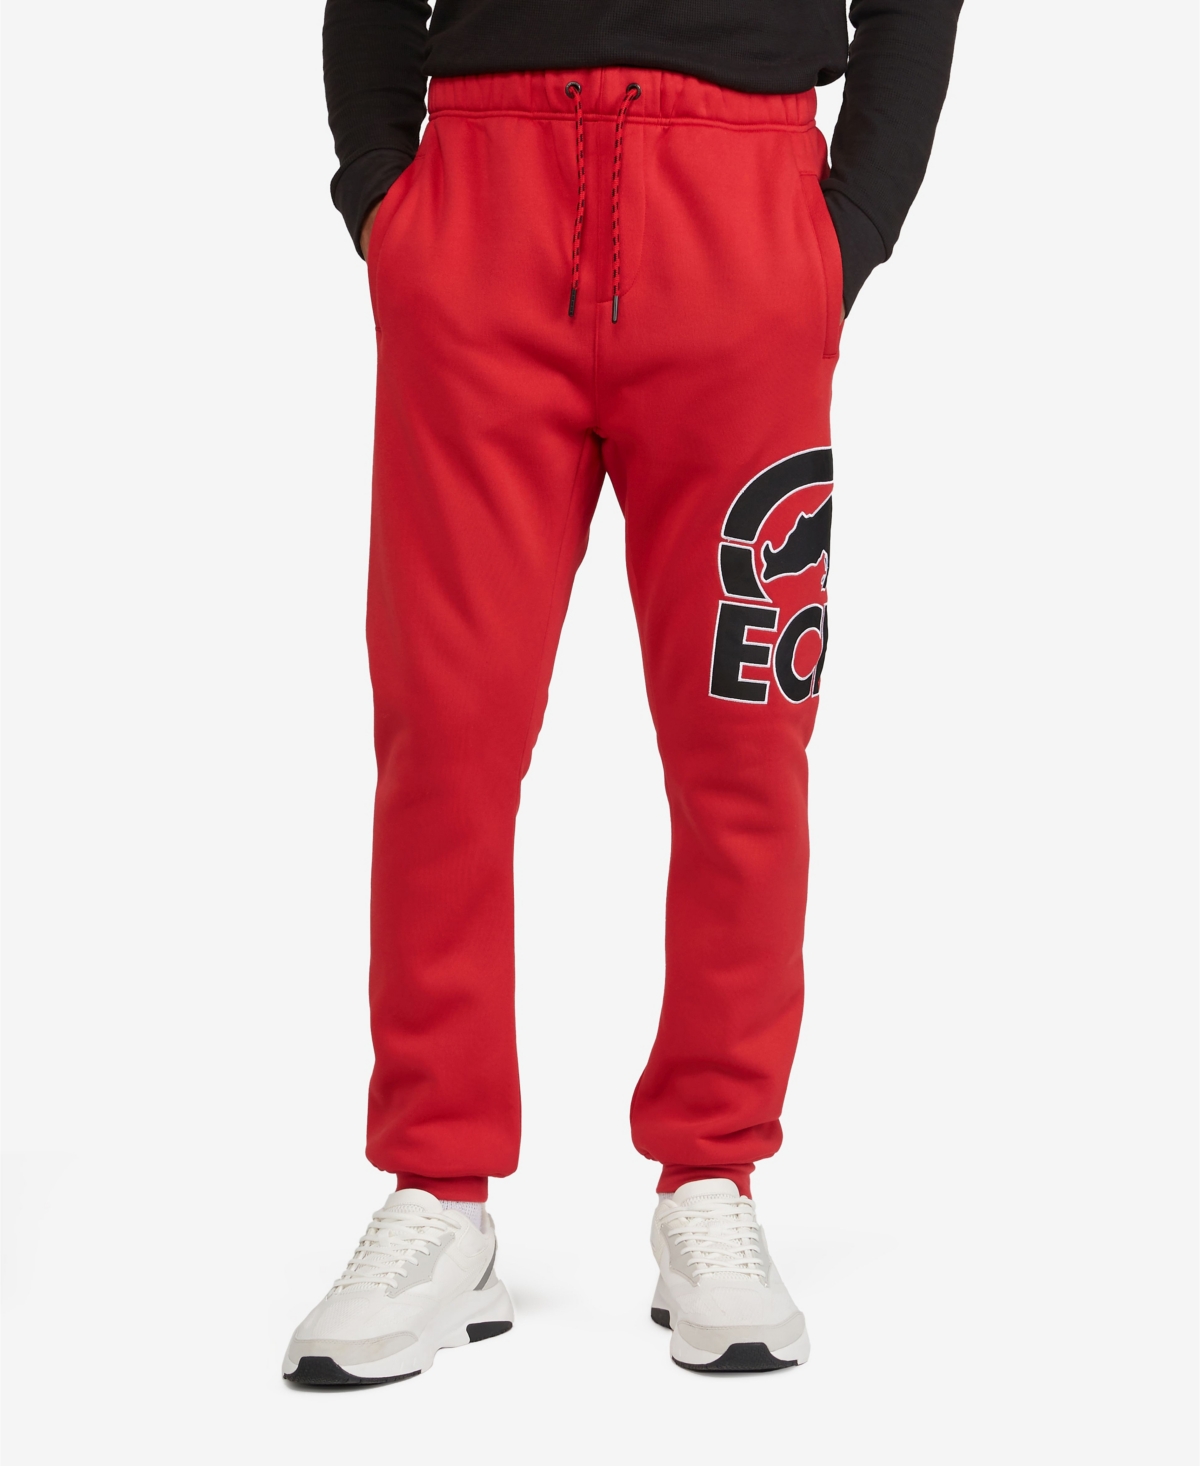 Men's Big and Tall Everclear Joggers - Red